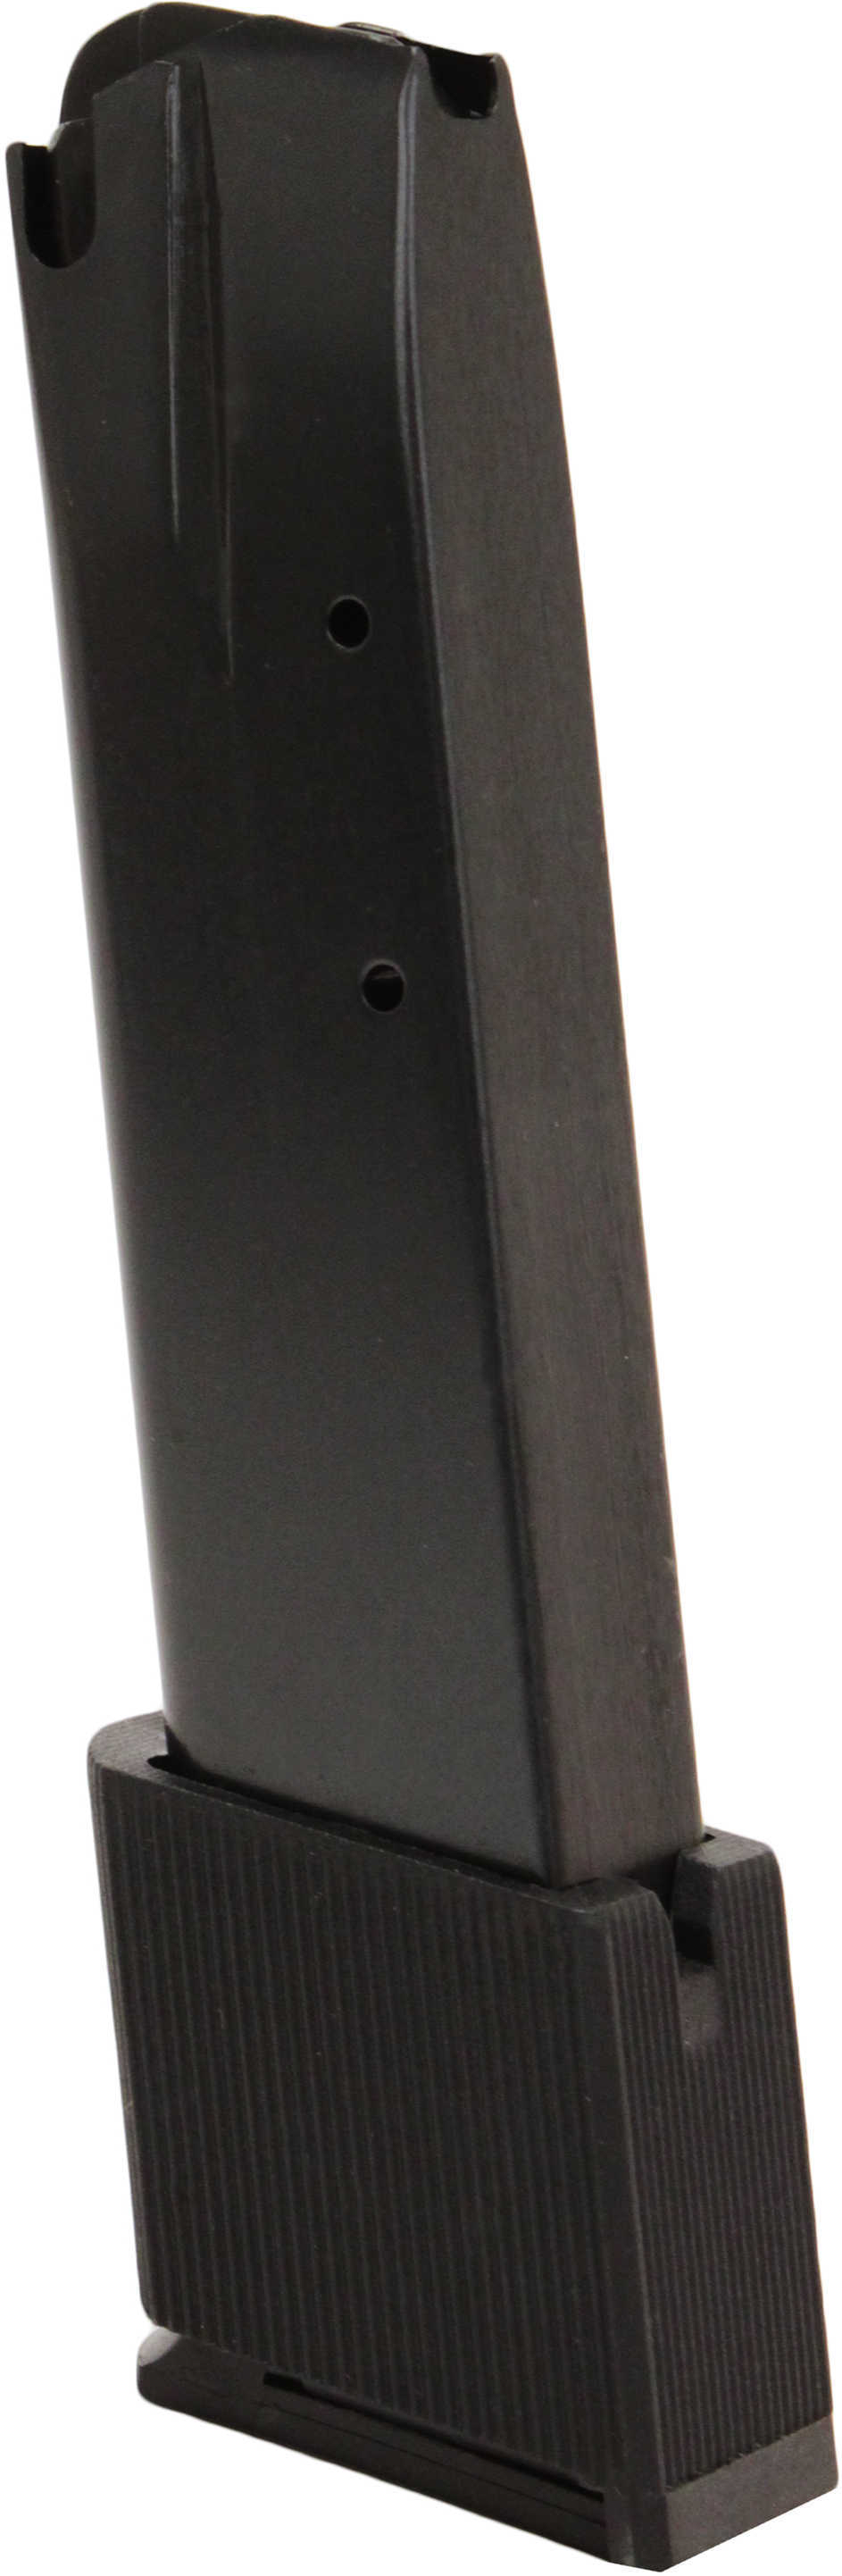 ProMag Smith & Wesson 910 915 459 5900 Series 9mm Magazine 20 Round Blued SMI-A2